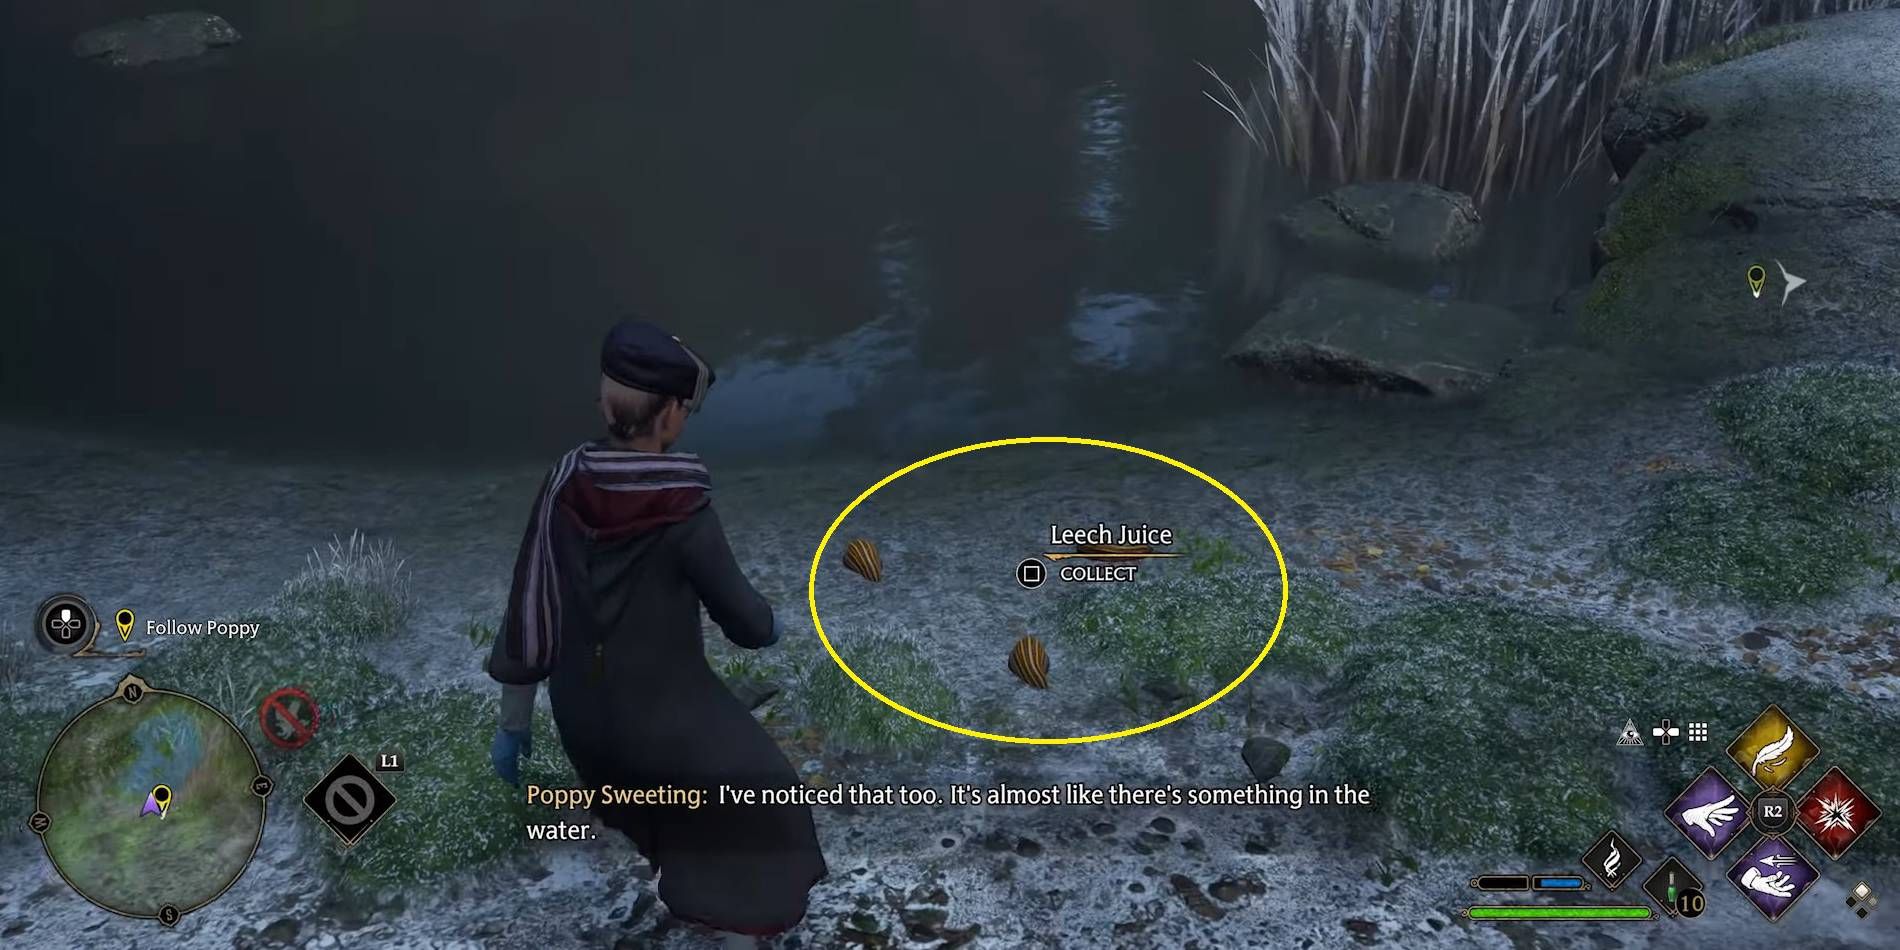 Hogwarts Legacy Finding Leech Juice in Swamp Area During Main Story Quest Player Perspective Screenshot